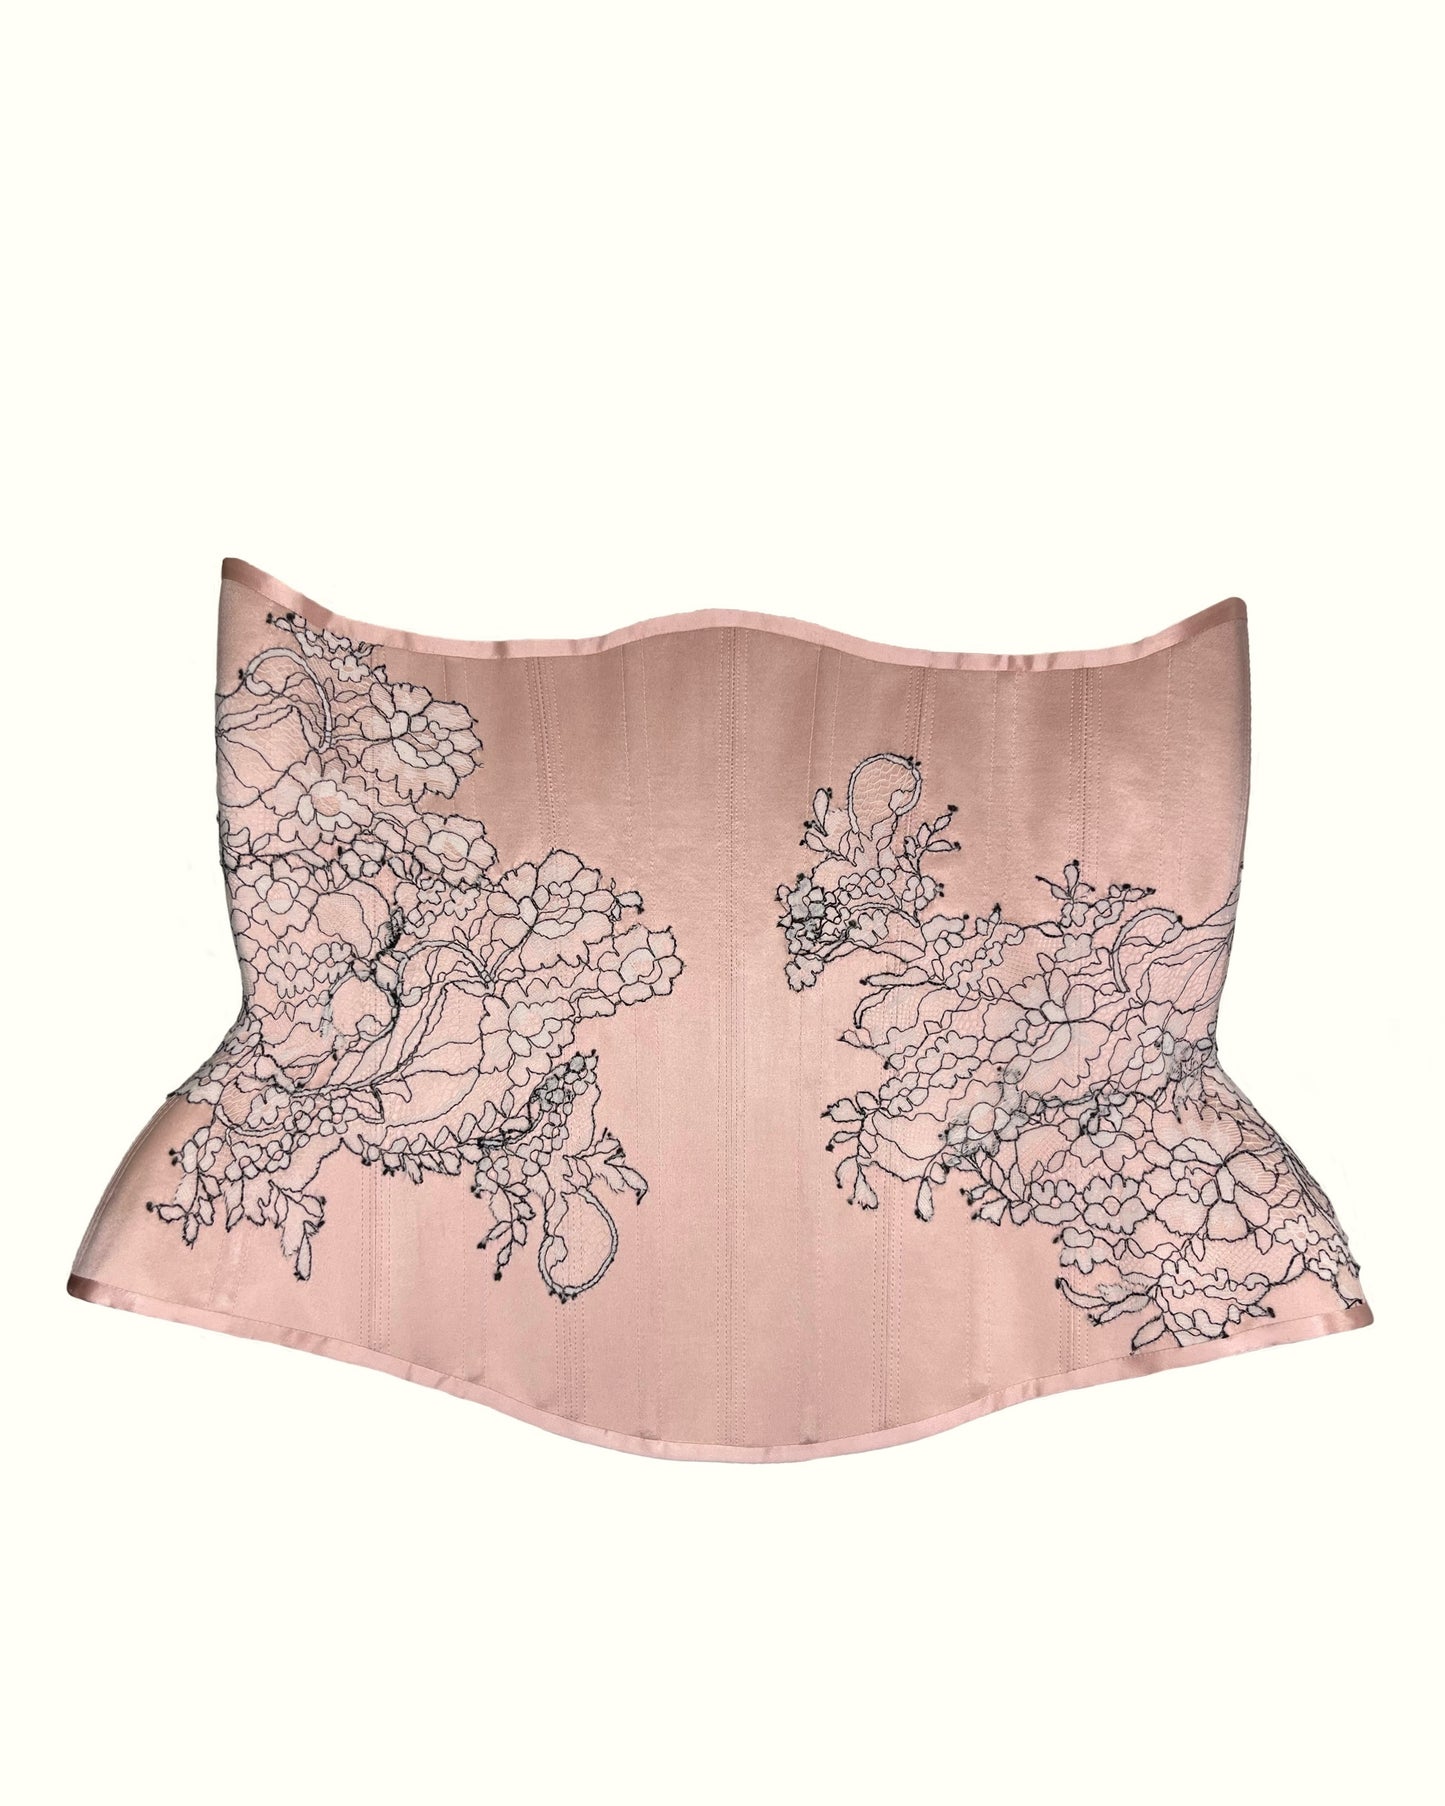 Silk Underbust Corset with Chantilly Lace